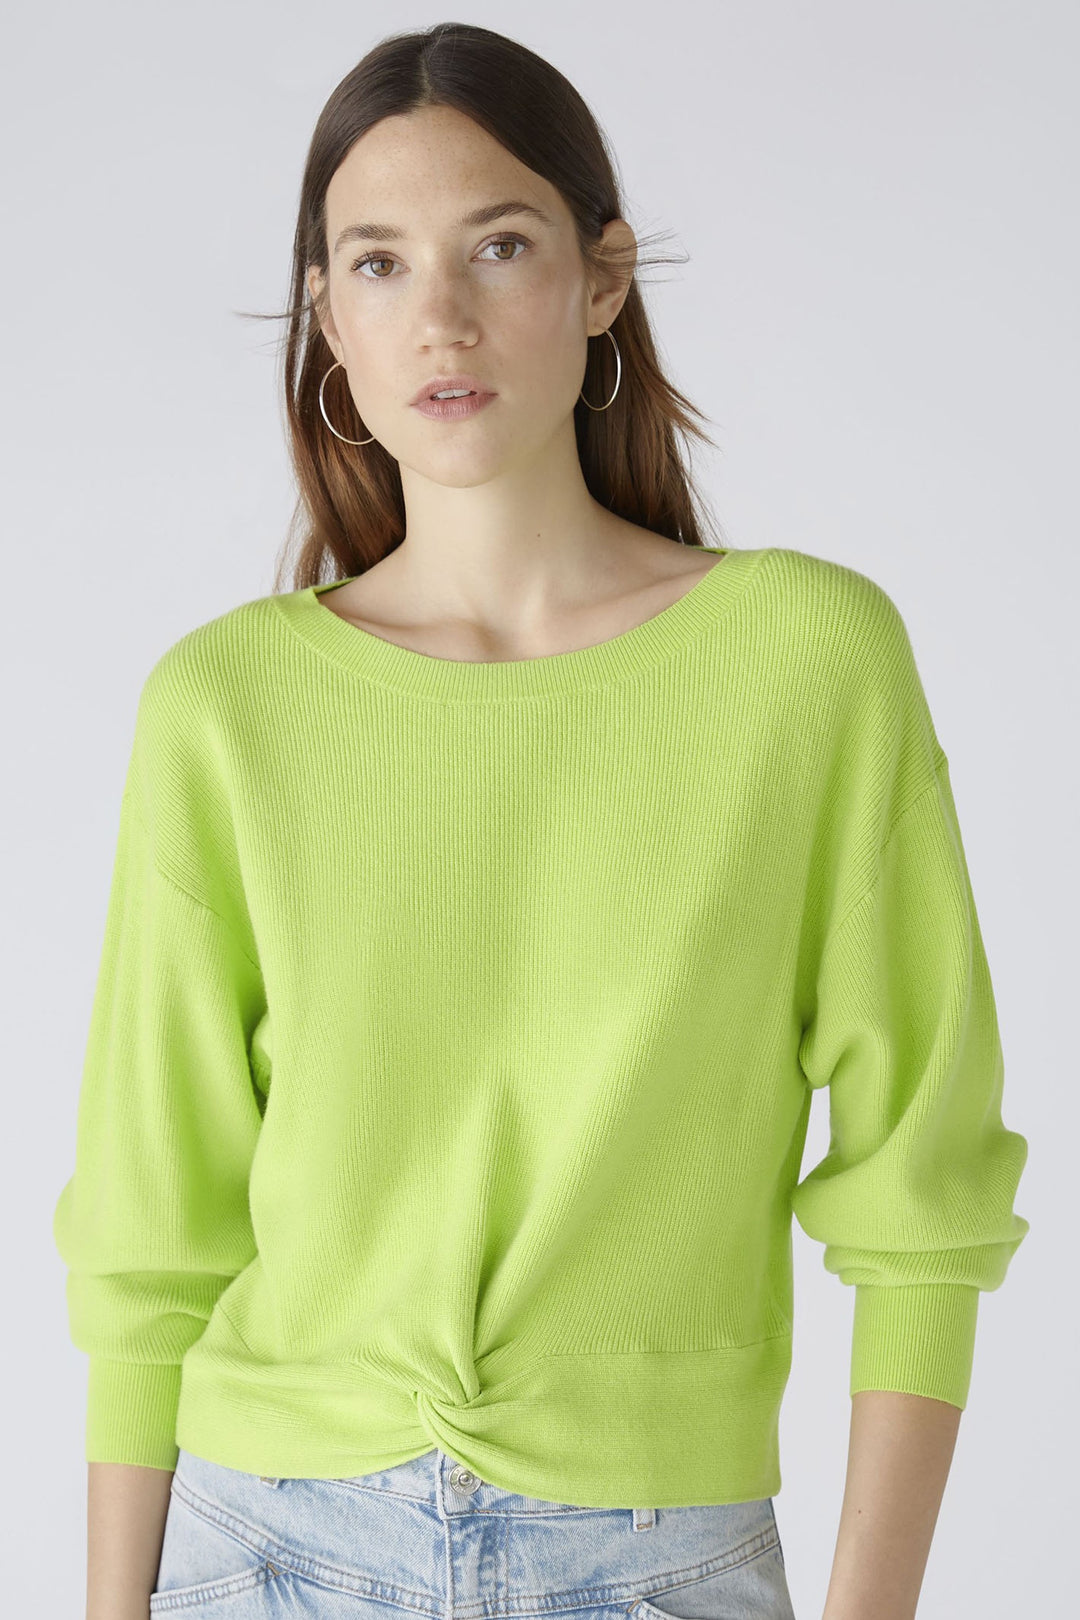 Oui 86645 Tender Shoots Green Knotted Front Jumper - Dotique